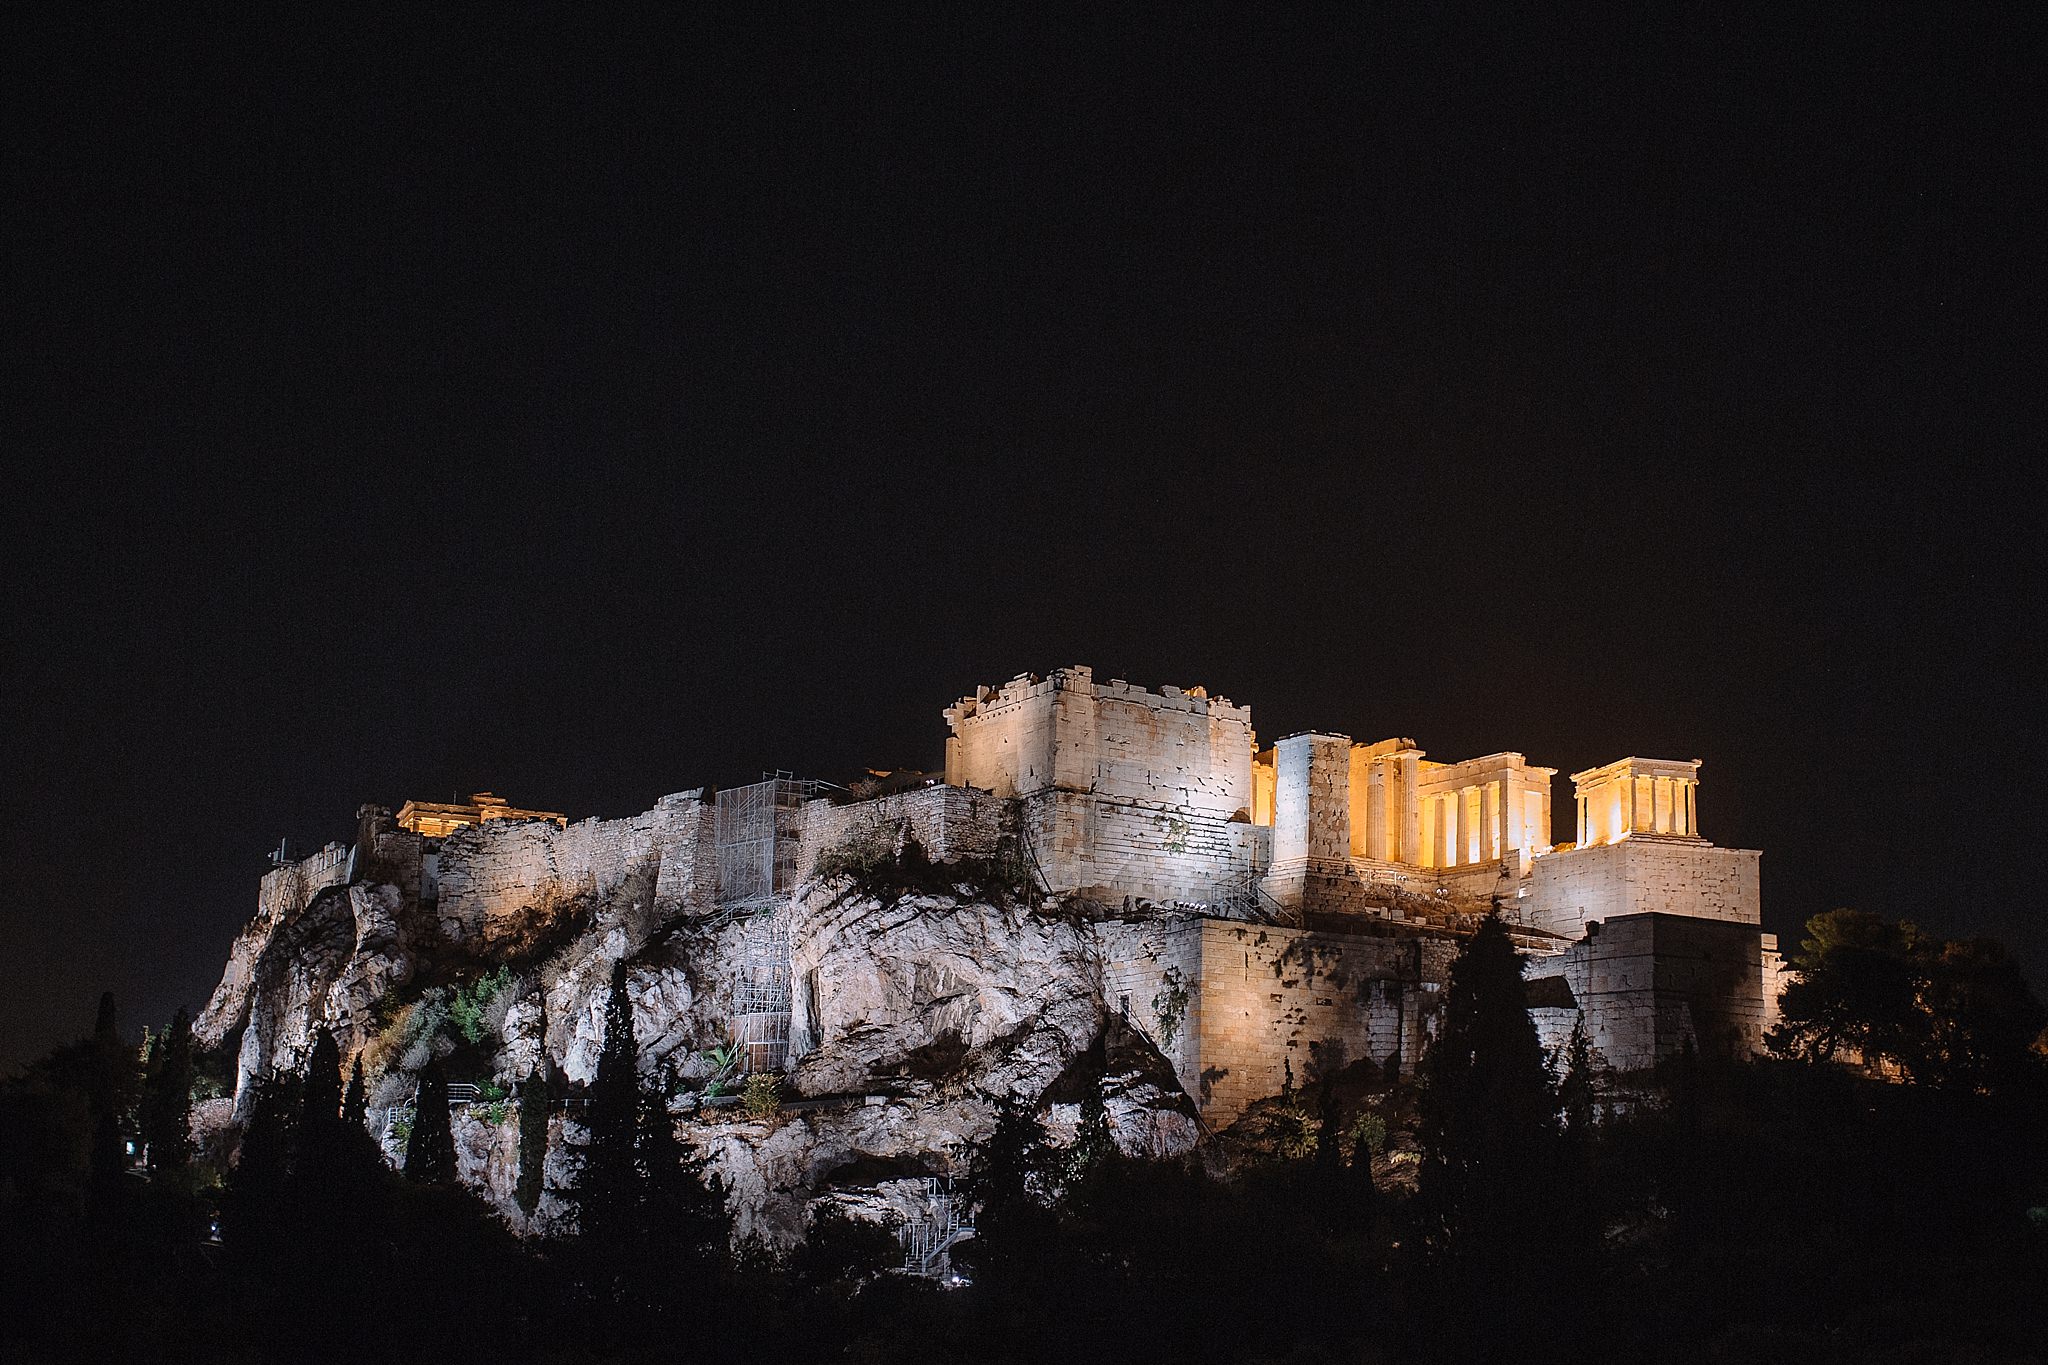   The Acropolis by night from Areopagus Hill  